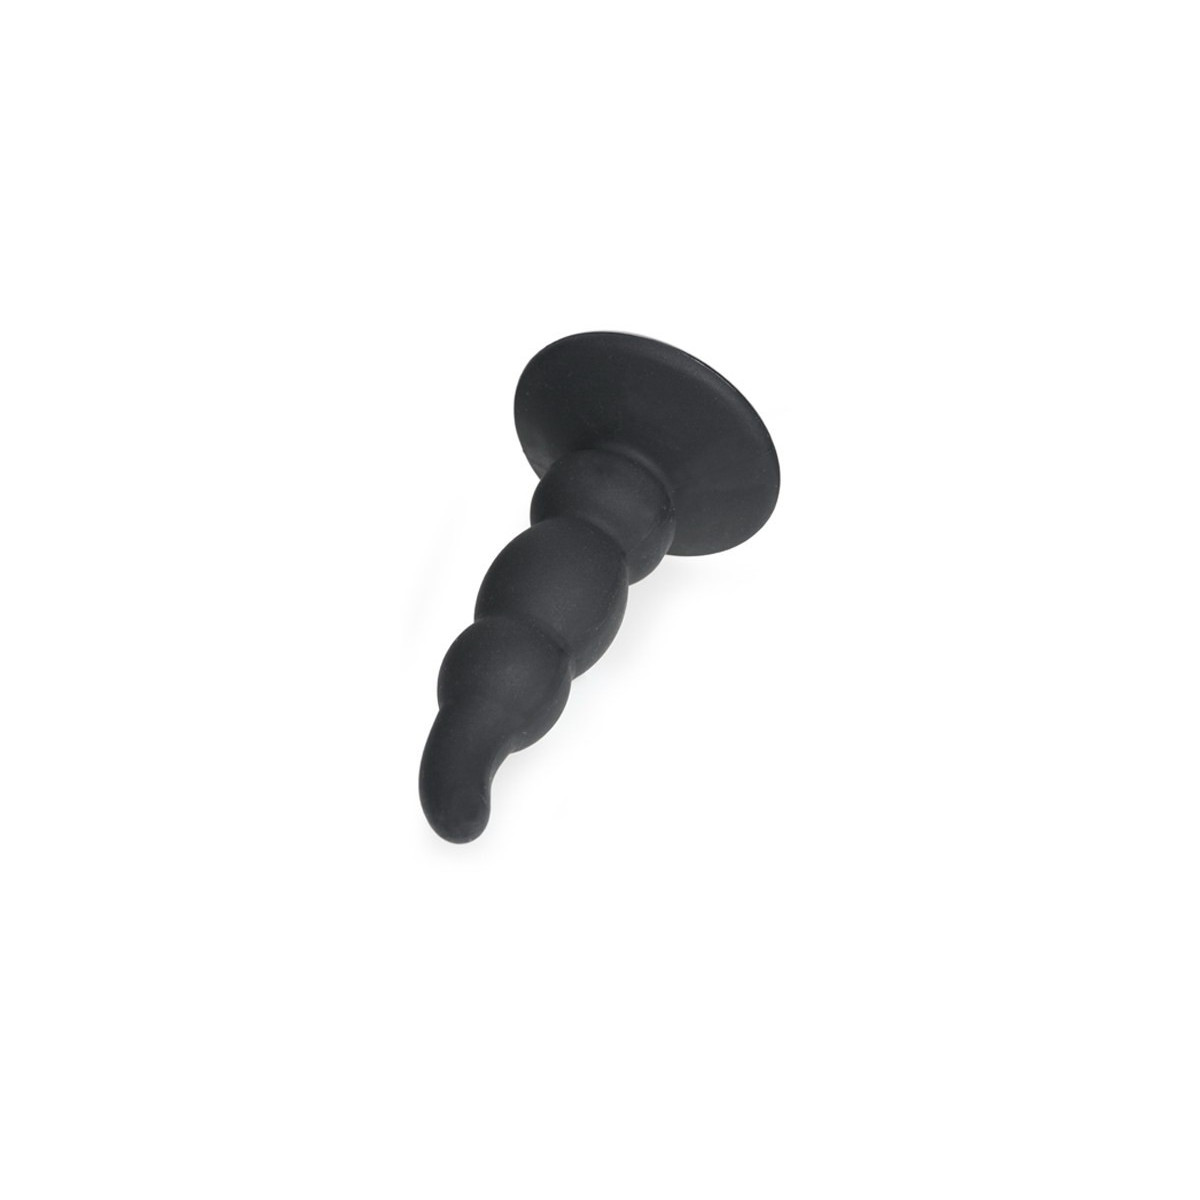 Stumpy Thumpers Black Silicone